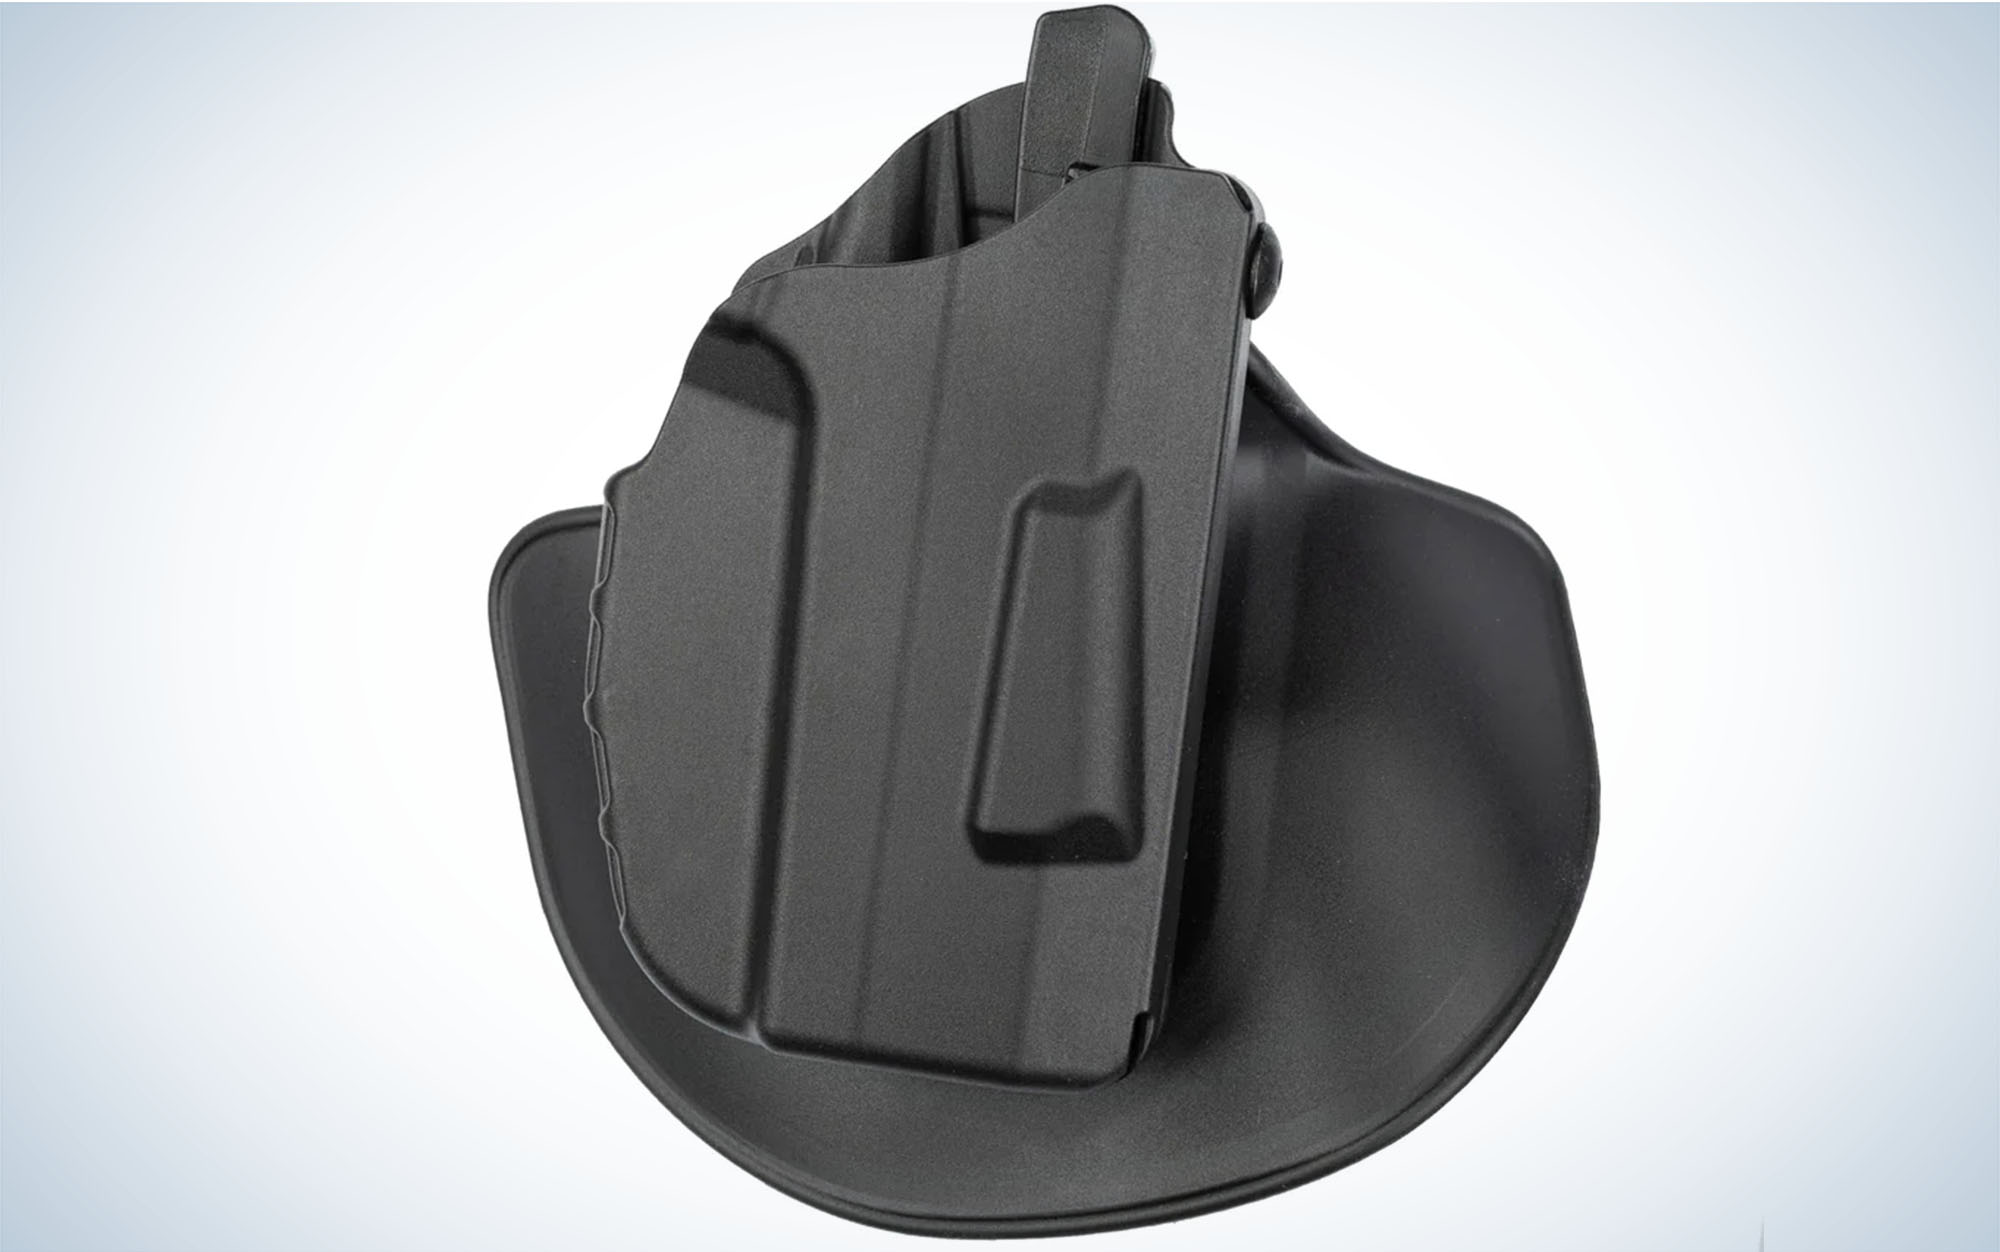 The Safariland 7378 ALS Concealment Paddle Holster is one of the best concealed carry holsters.